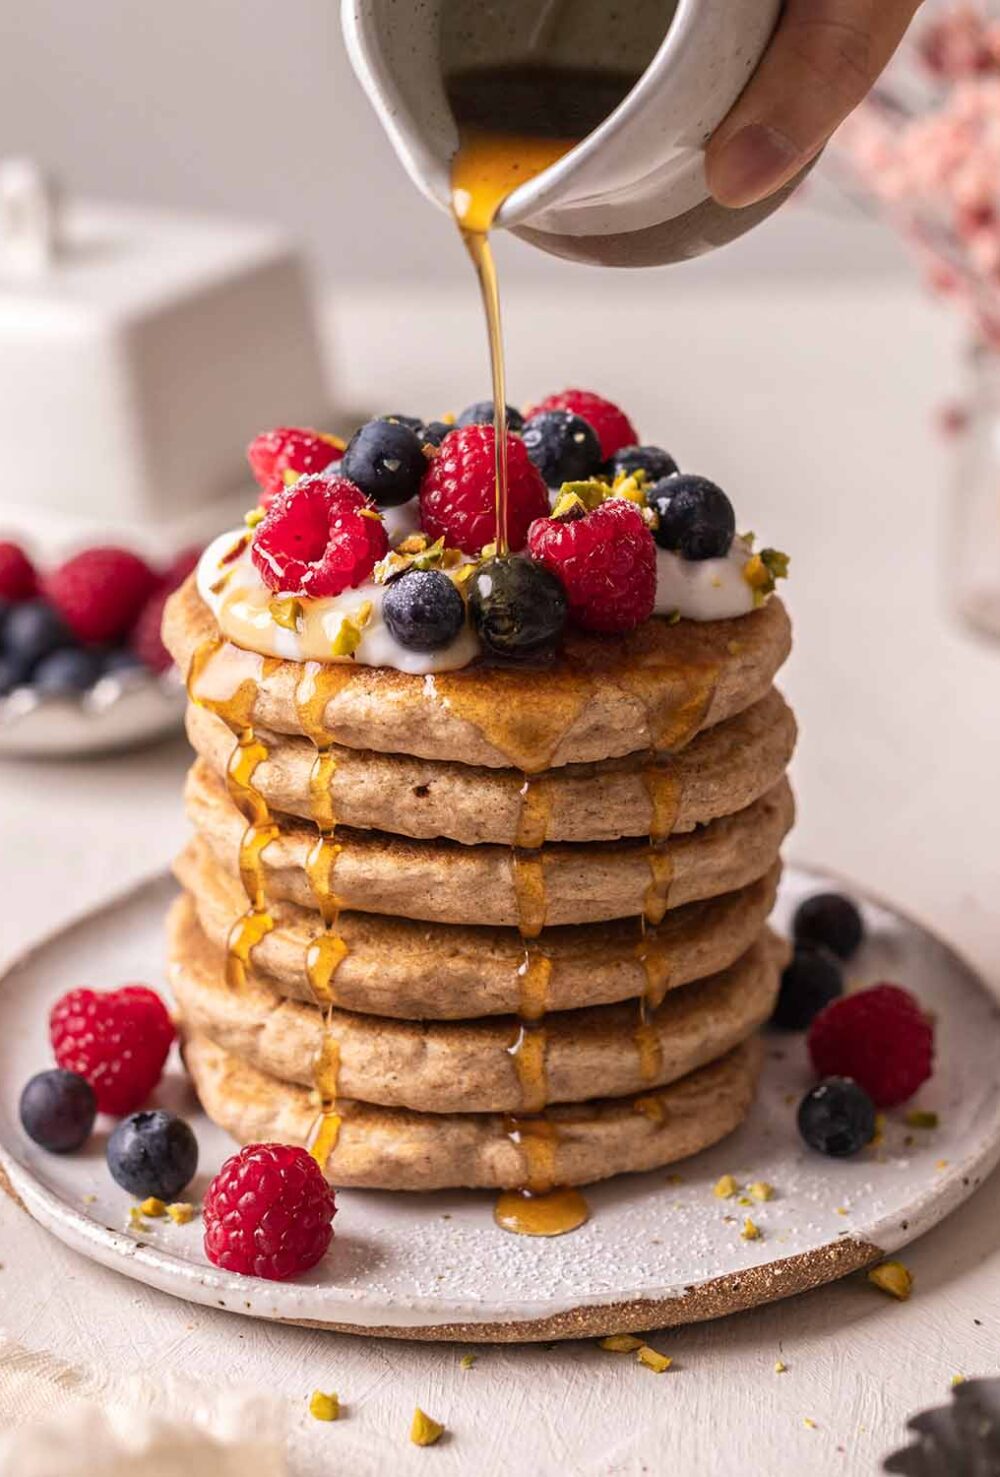 Tall stack of decorated whole wheat pancakes with maple syrup poured on top and dripping down sides.